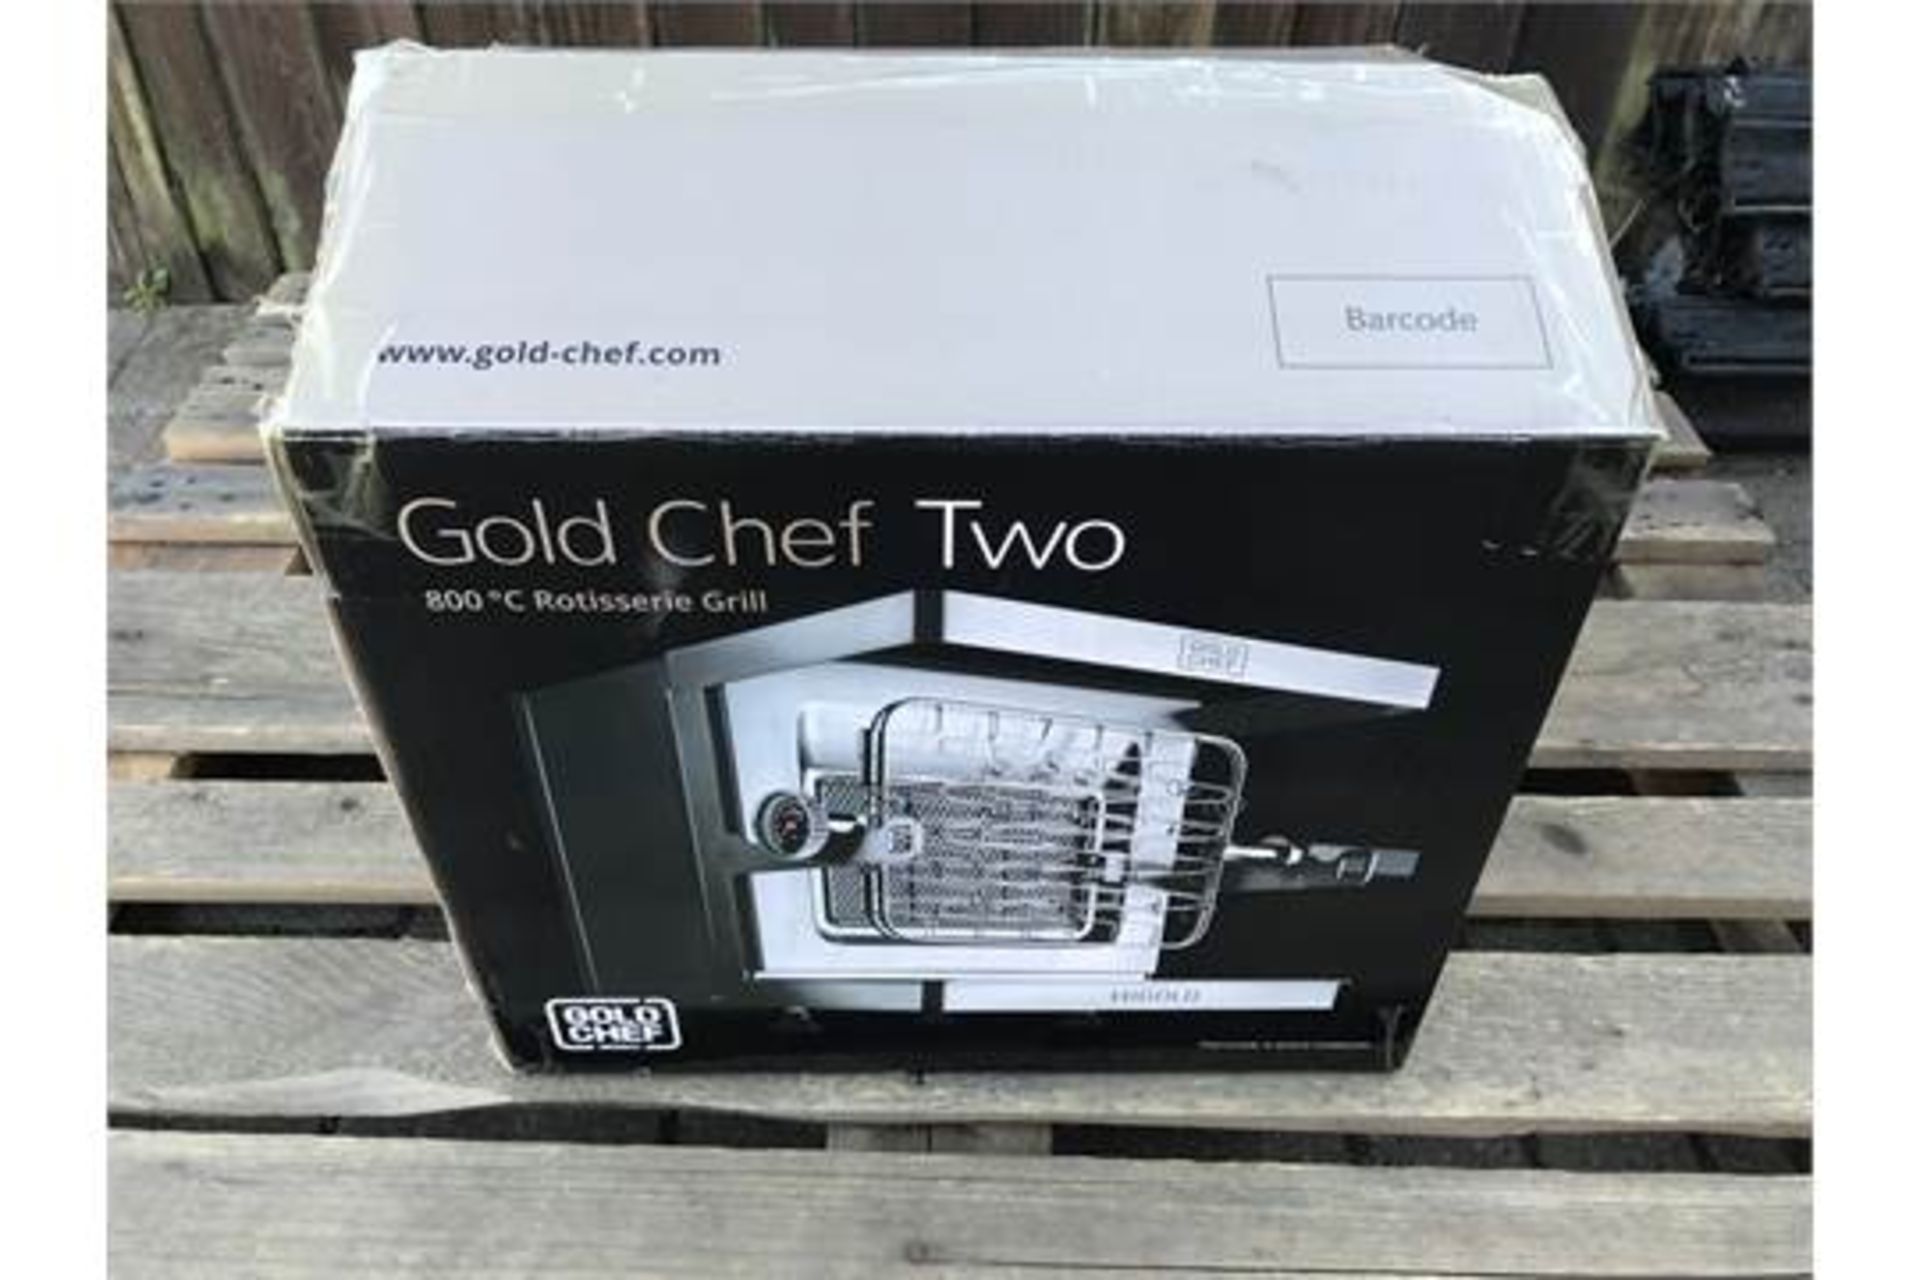 GOLD CHEF TWO 800C ROTISSERIE GRILL **BRAND NEW** - Image 5 of 5